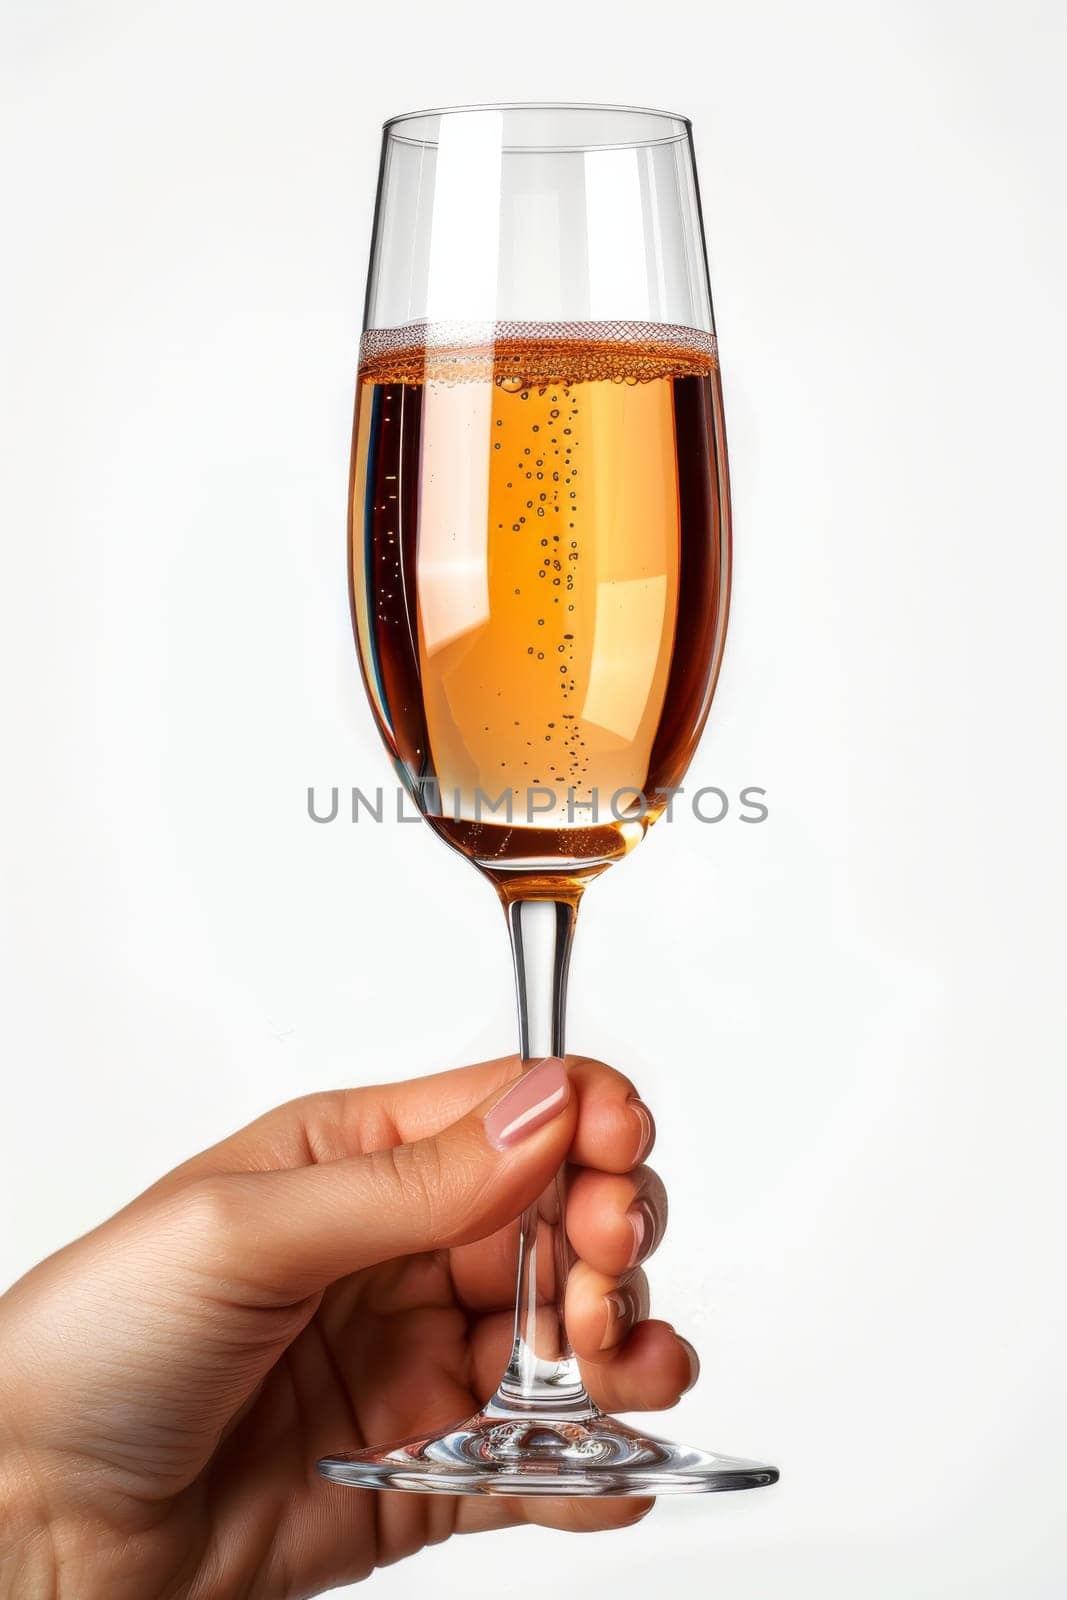 A hand holding a glass of champagne. The glass is half full and the bubbles are rising to the top. Concept of celebration and enjoyment